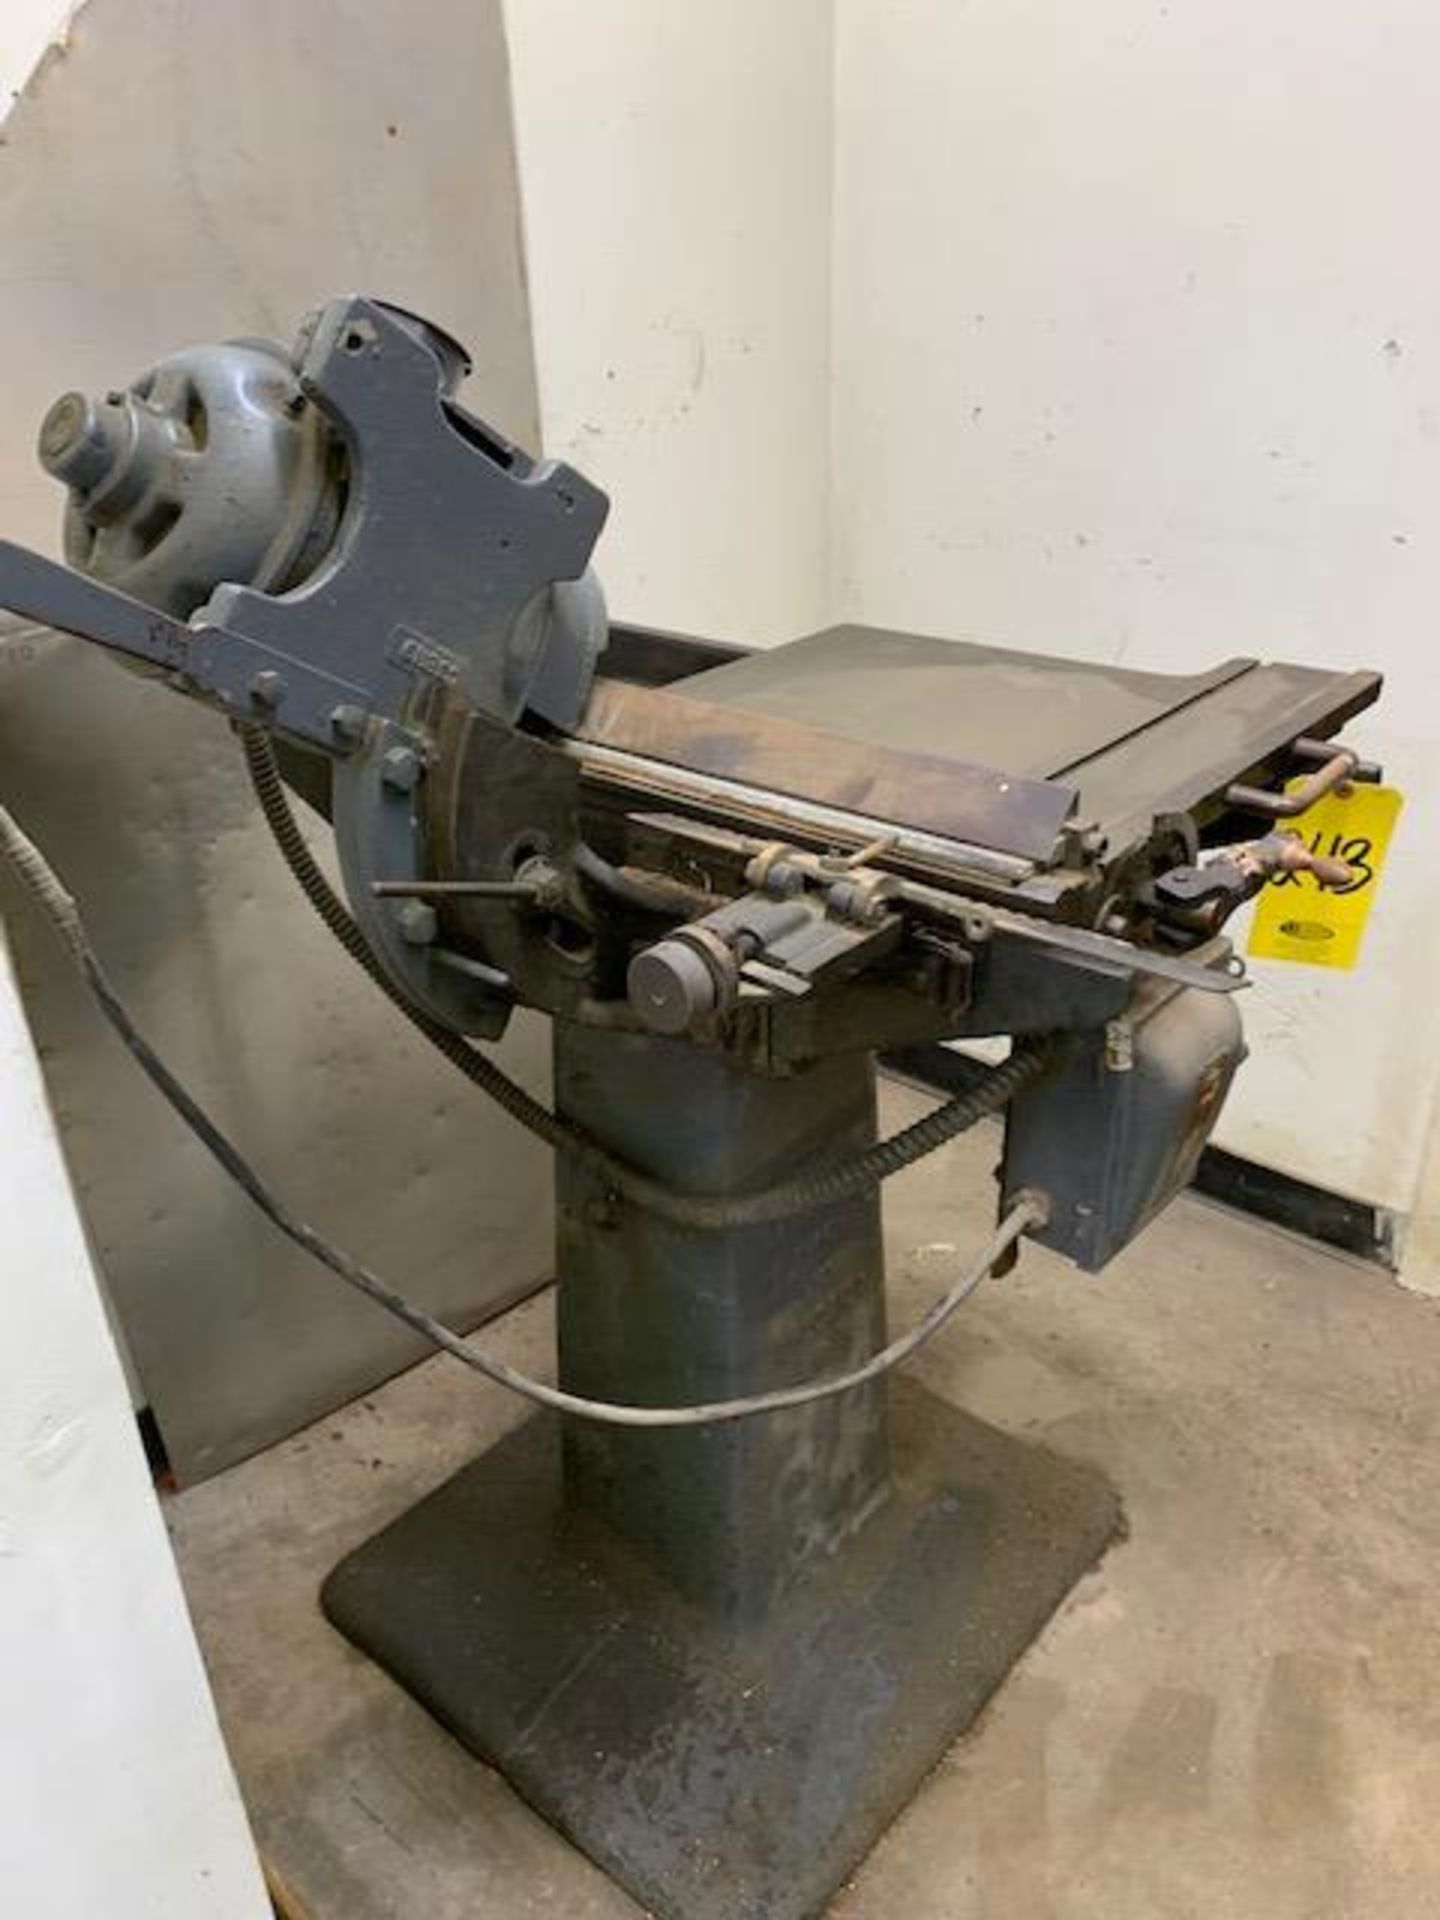 OSTRANDER SEYMOUR TRIMSAW WITH 8 INCH CARBIDE TIPPED BLADE AND 1 KVA MOTOR - Image 4 of 4